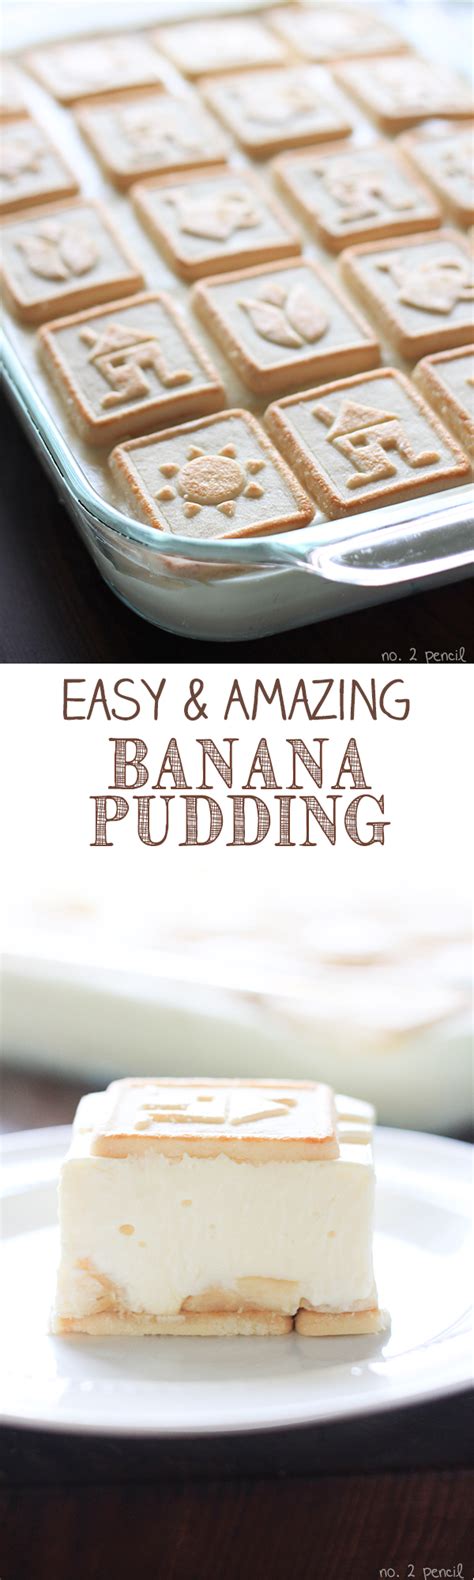 Blend the milk with the pudding mix. Paula Deen Banana Pudding Recipe